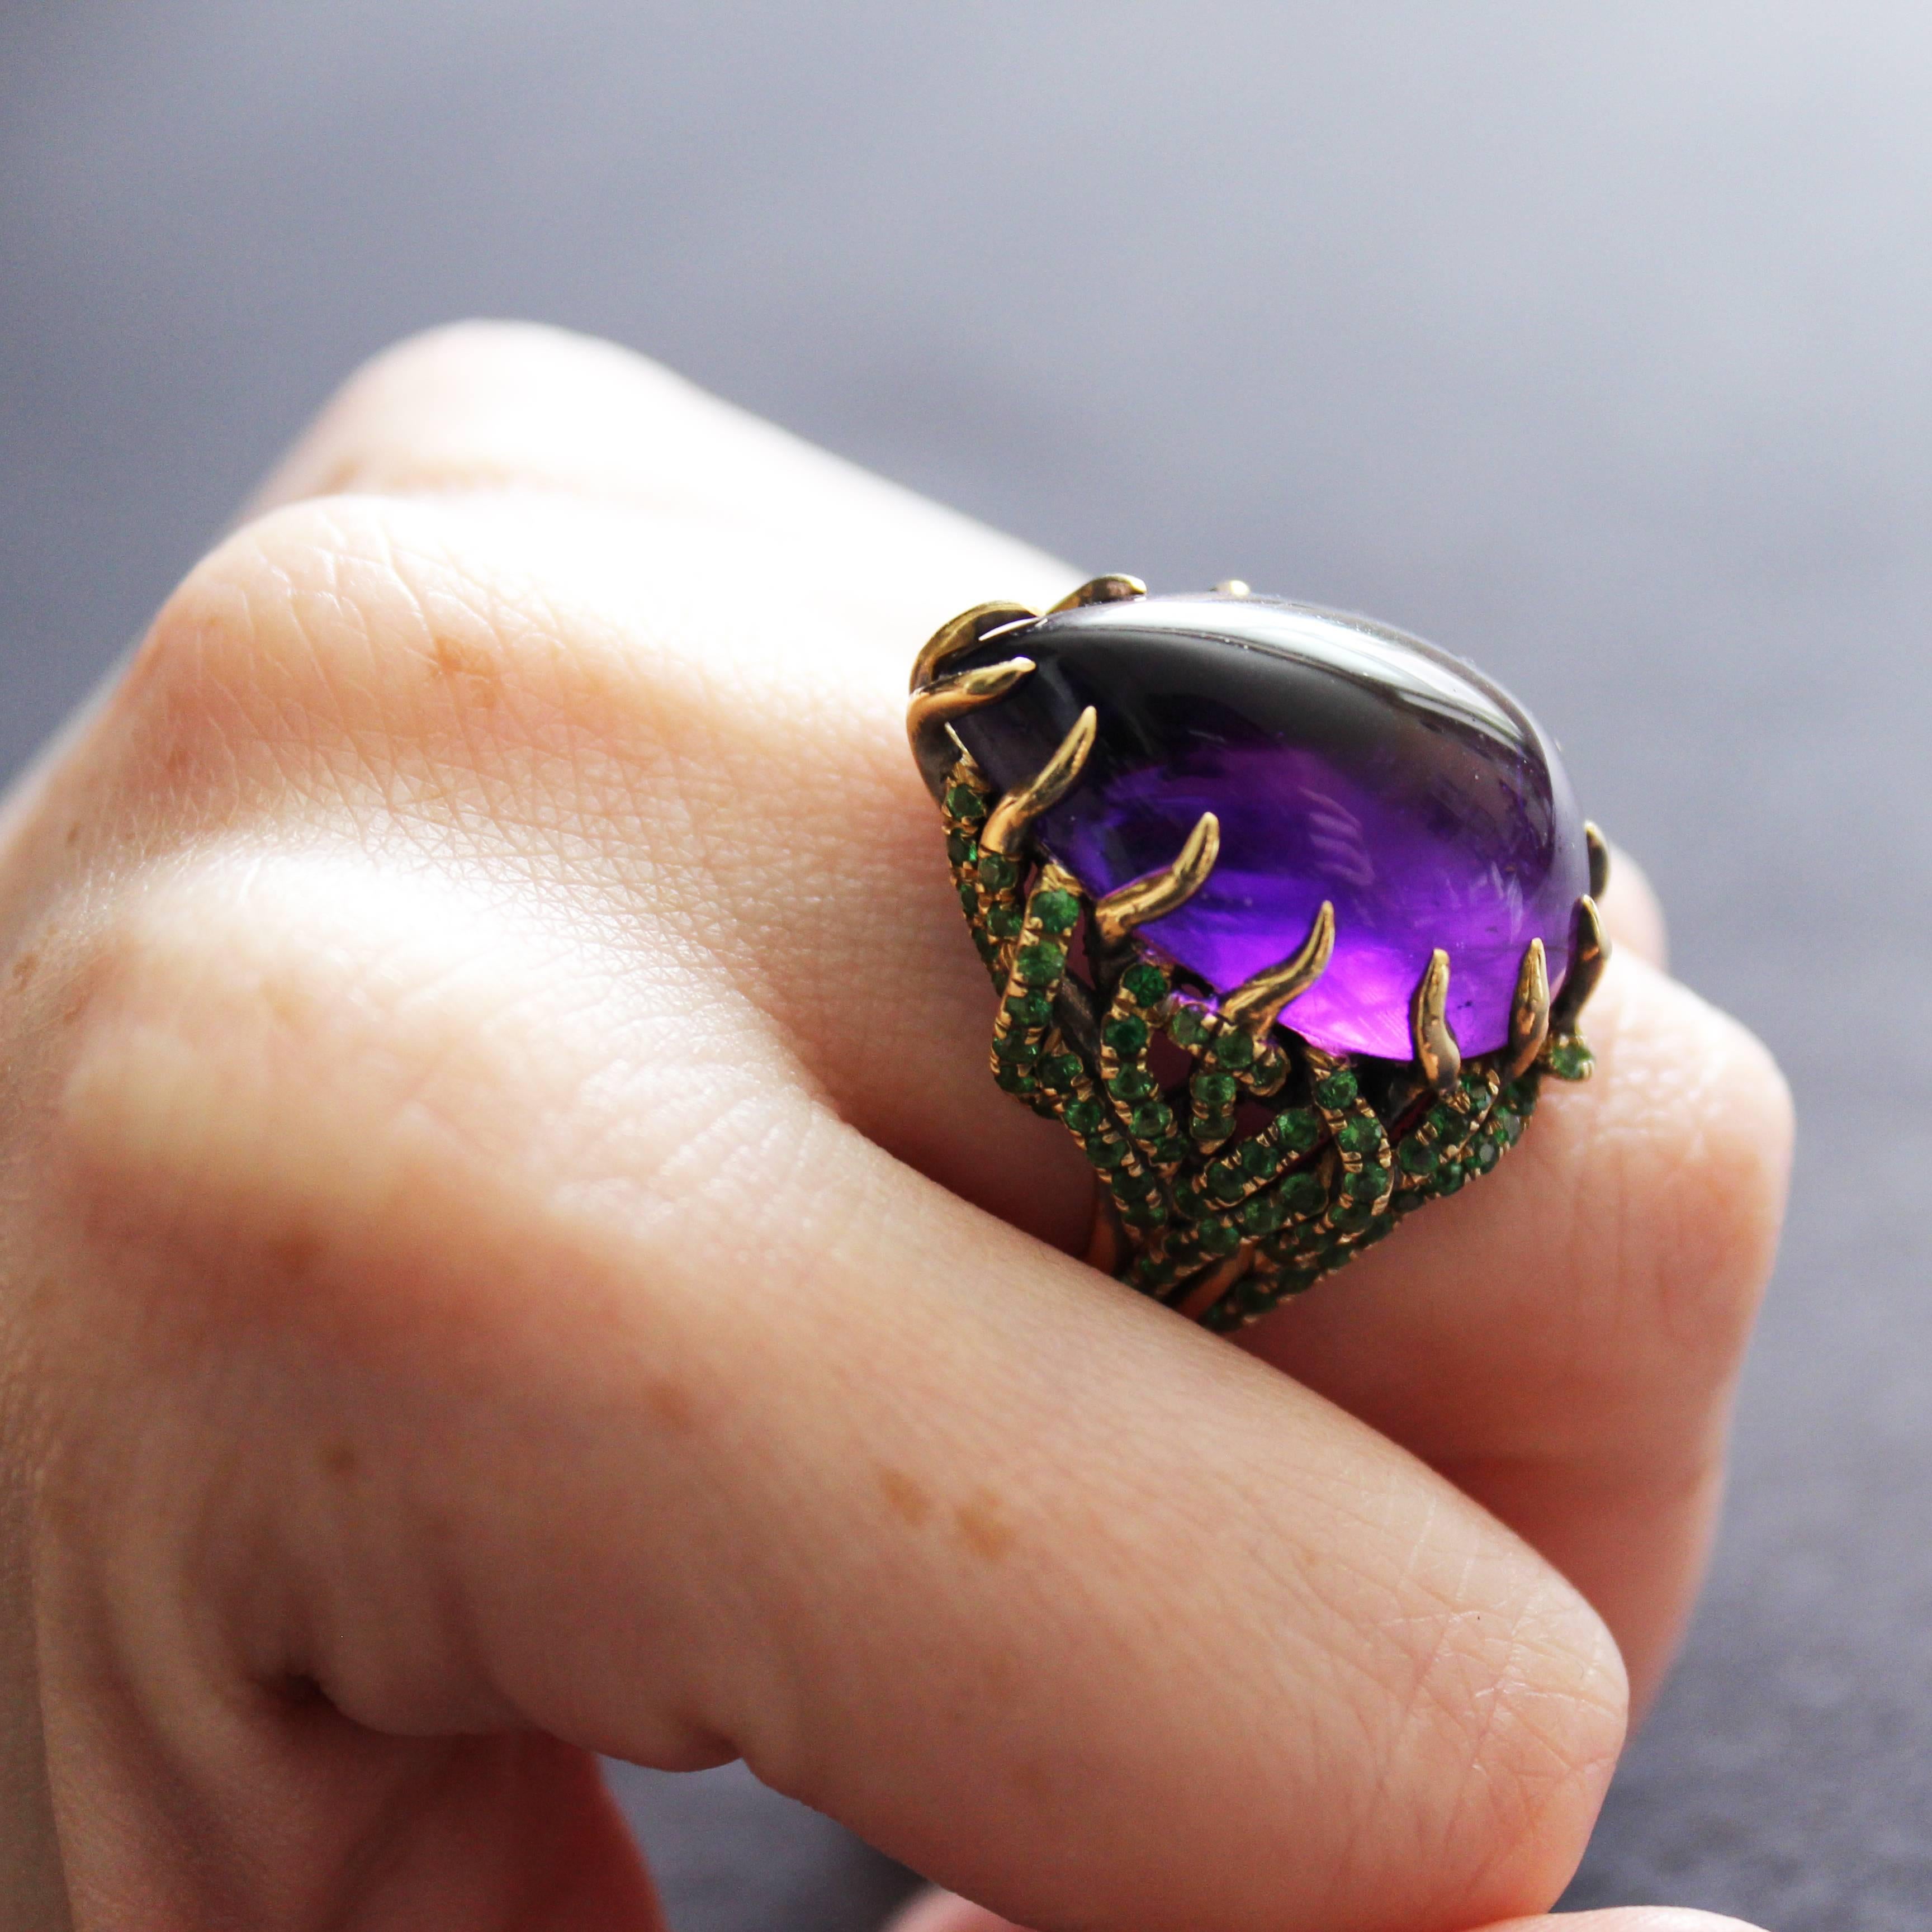 Wendy Brandes One-of-a-Kind Birthstone Amethyst and Tsavorite Cocktail Ring For Sale 1